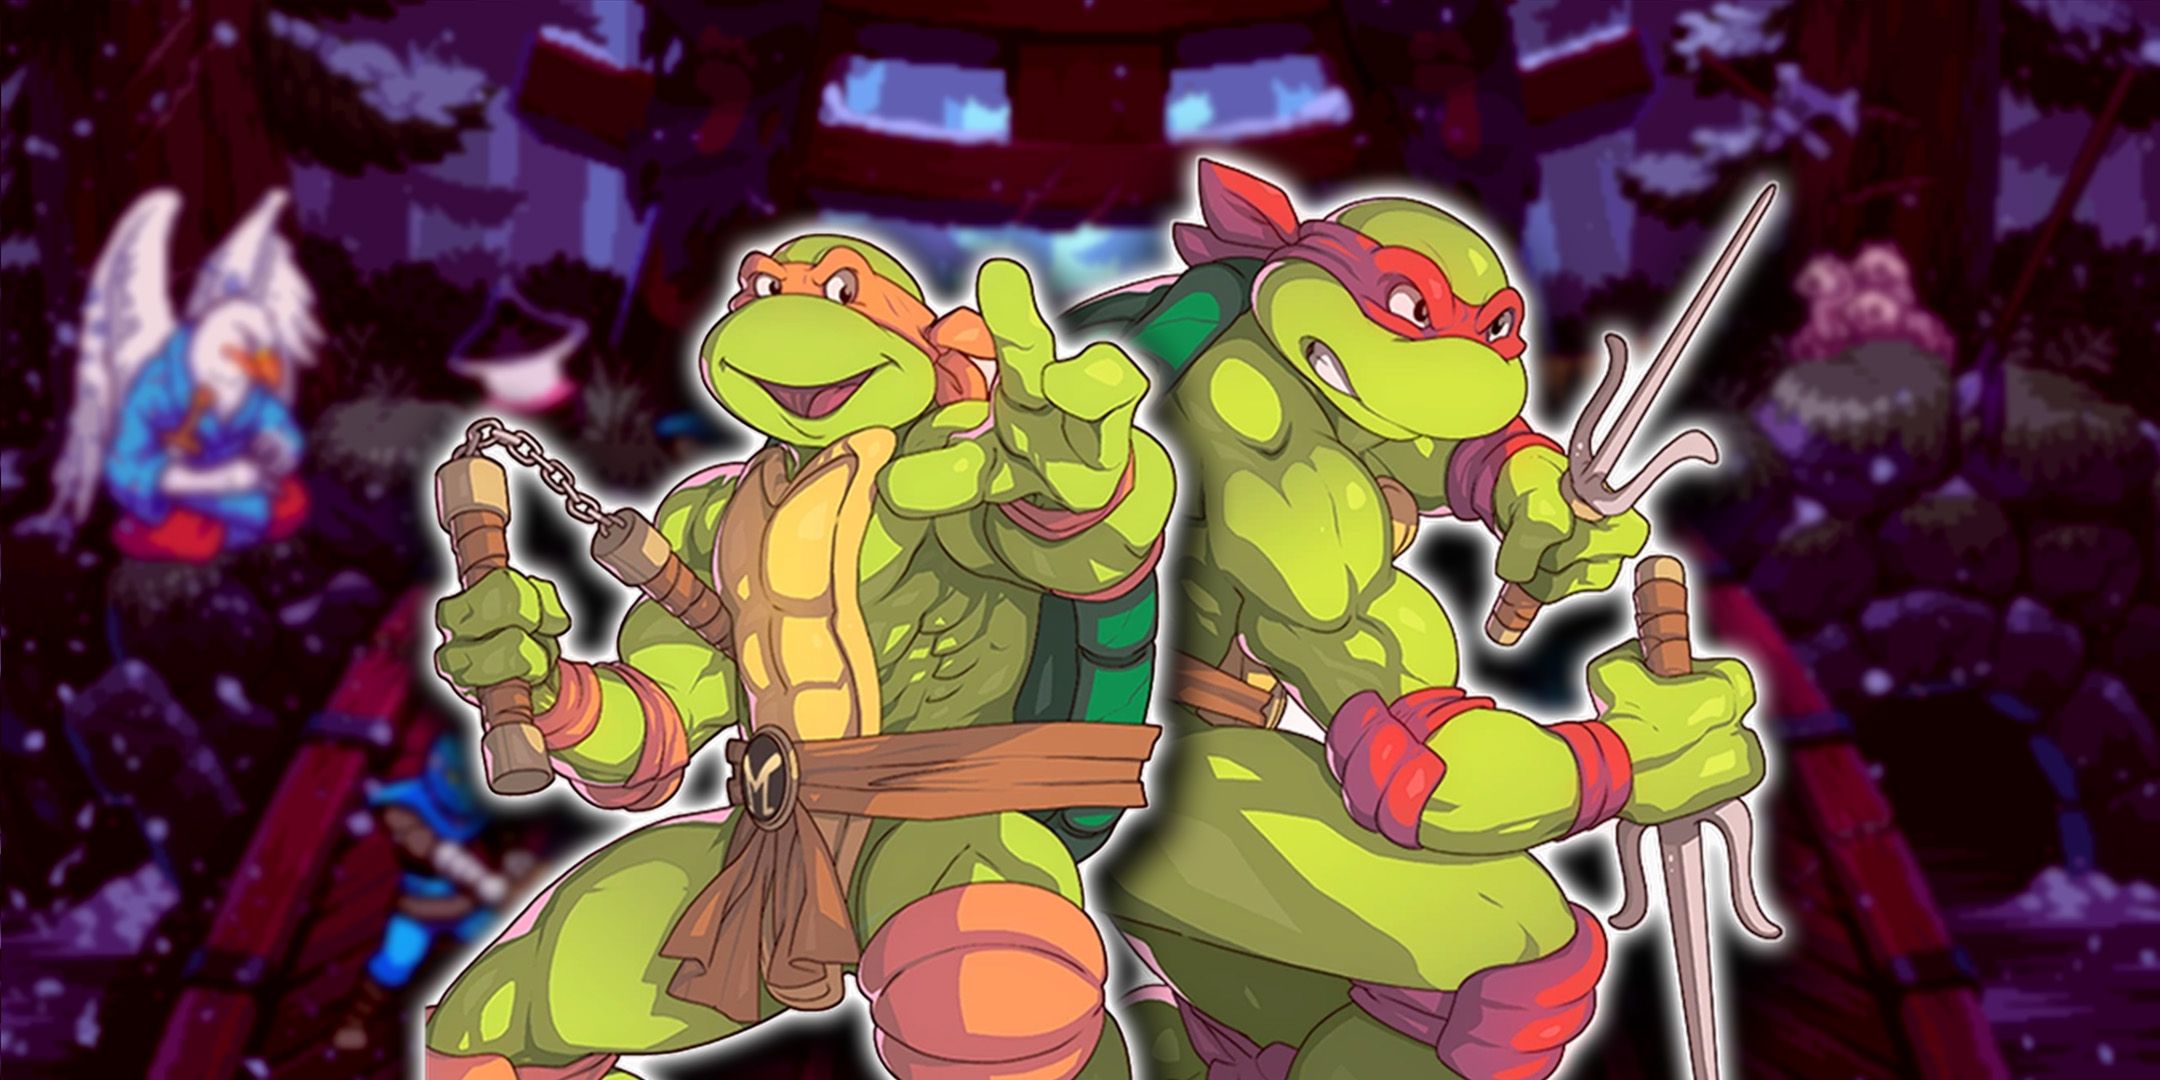 Michaelangelo and Raphael holding their weapons standing back to back